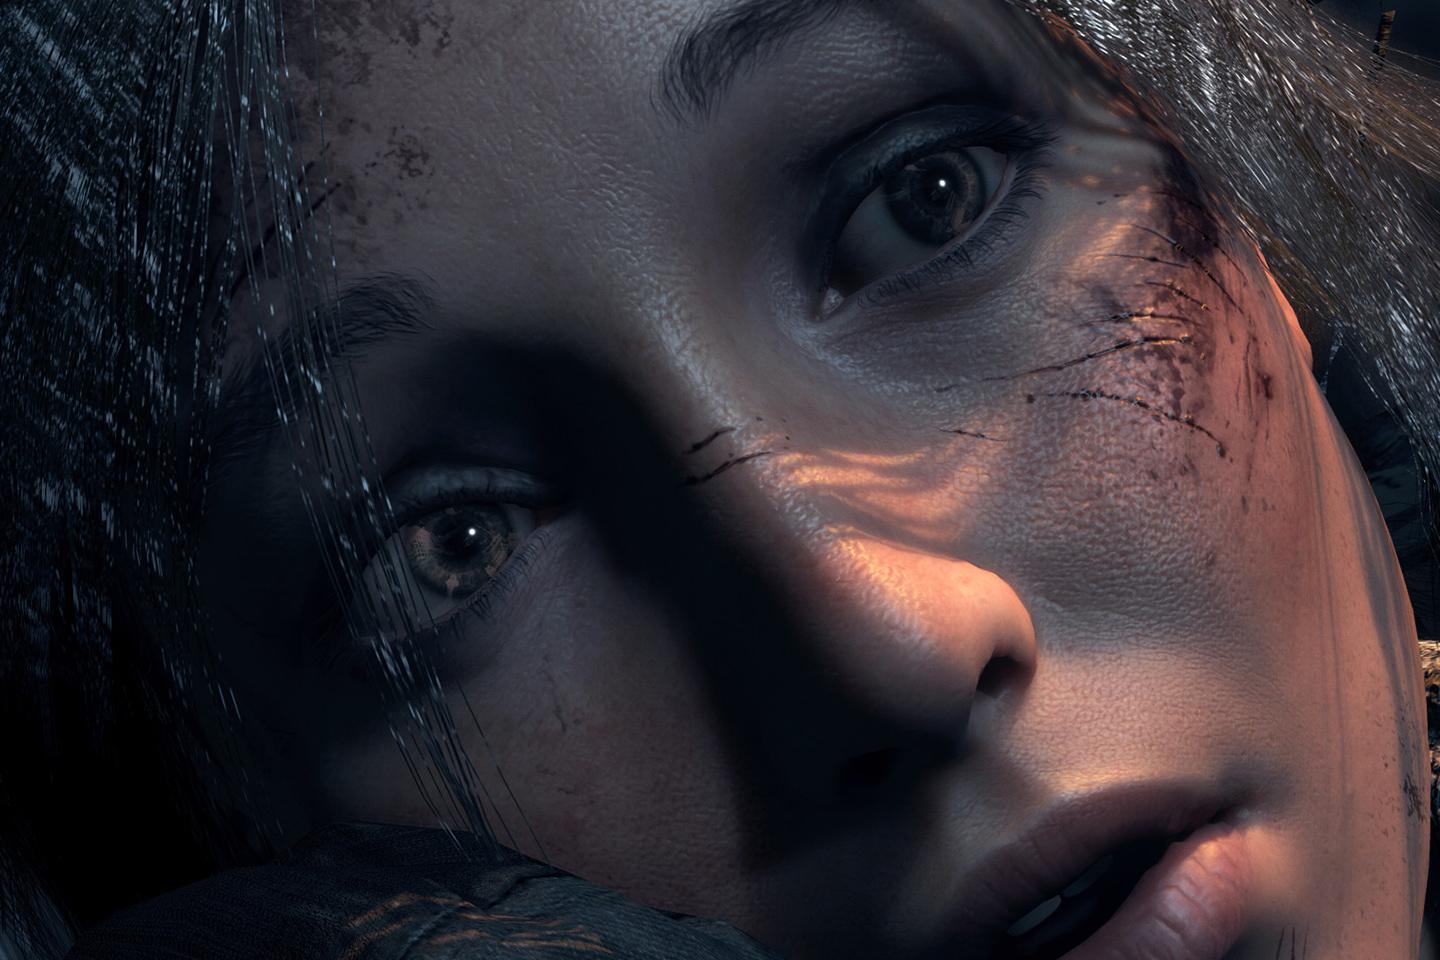 A close-up image of Lara Croft from the Tomb Raider series, showing her intense expression with striking detail in her eyes, amidst dirt and blood on her face.